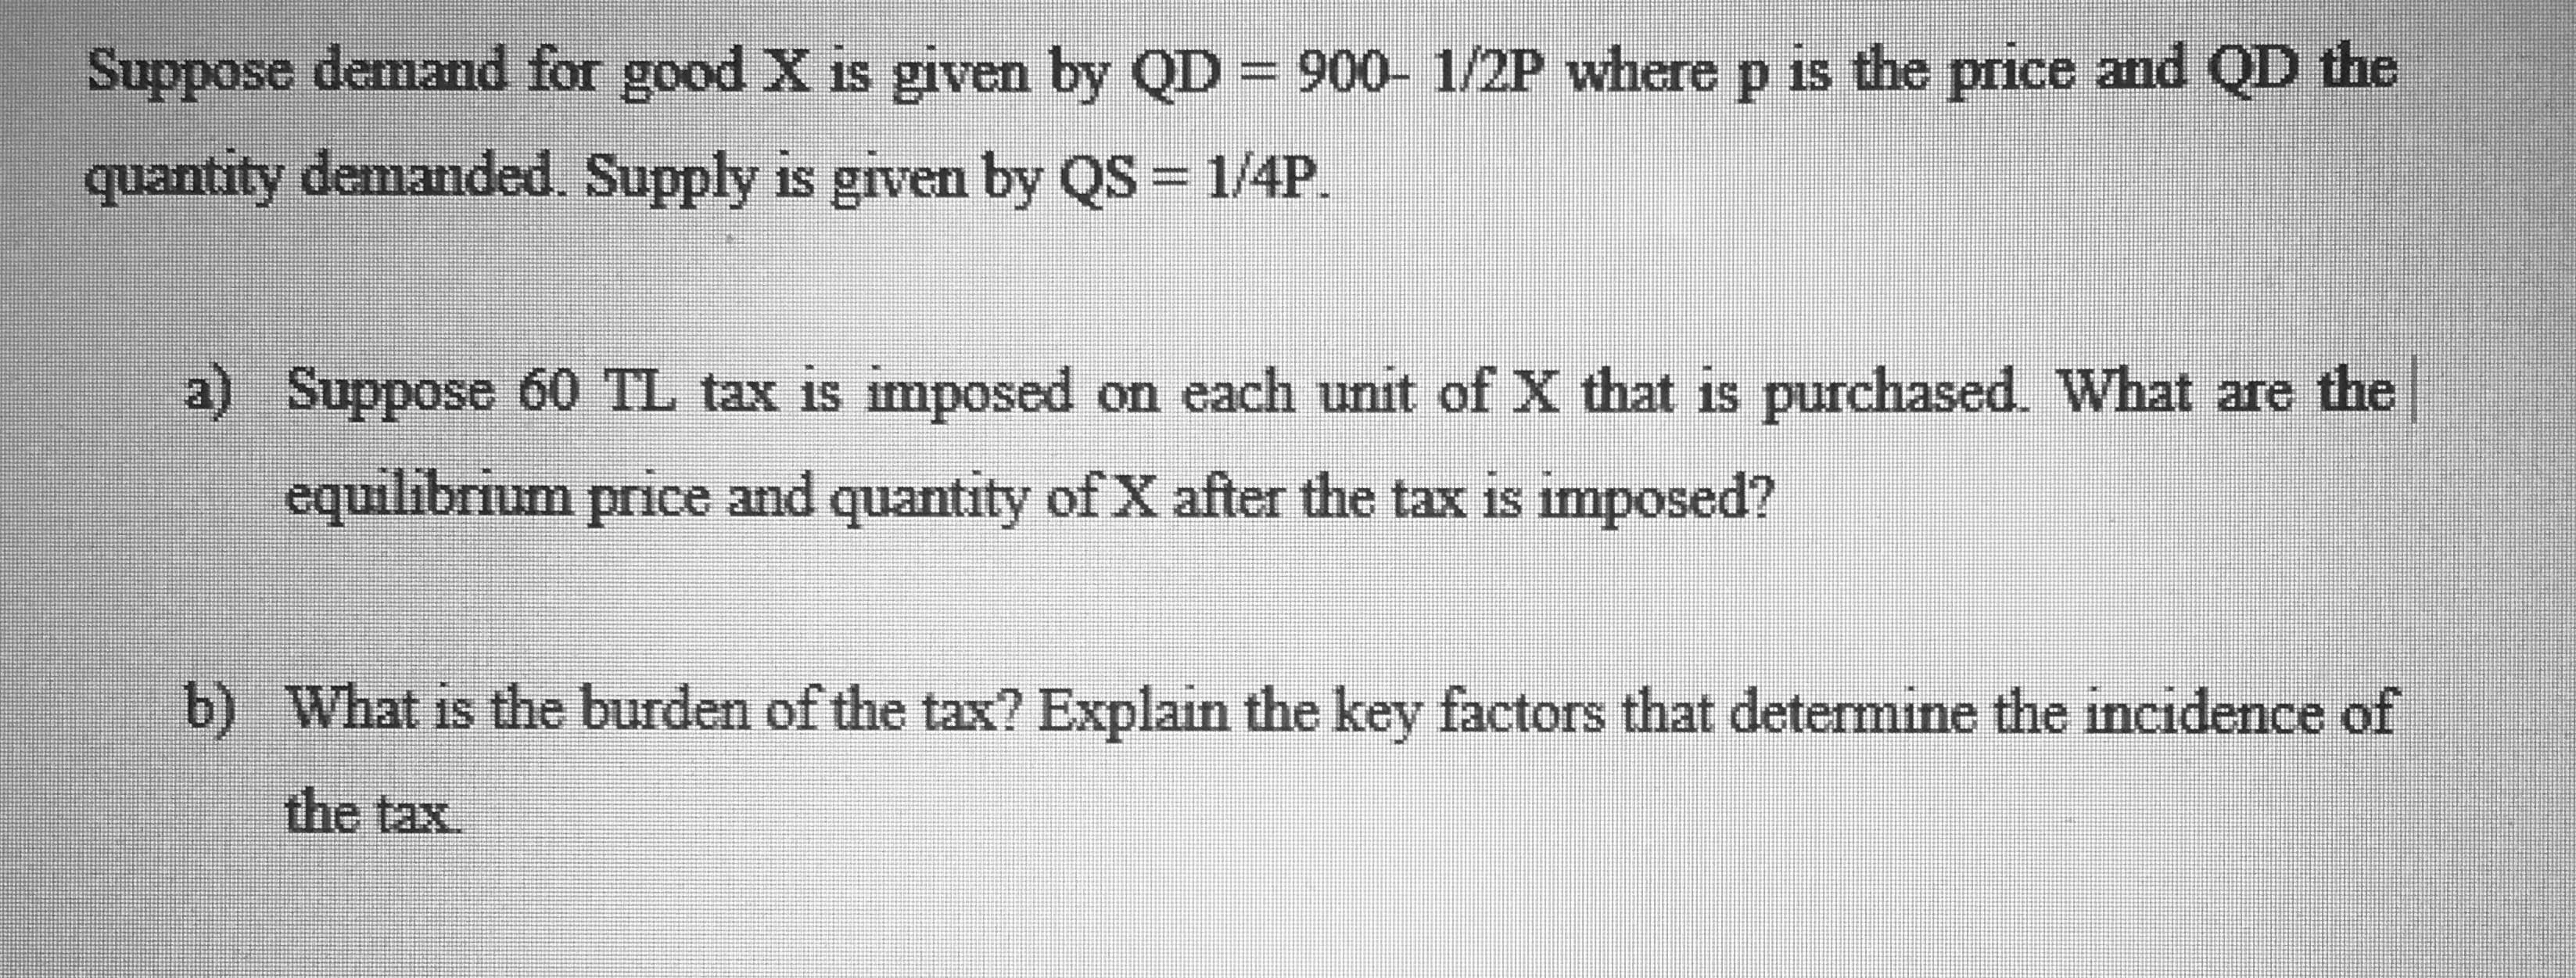 Suppose demand for good X is given by QD=900- 1/2P where p is the price and QD the
quantity demanded Supply is grven by QS = 1/4P.
a) Suppose 60 TL tax is imposed on each unit of X that is purchased What are the
equilibrium price and quantity of X after the tax is imposed?
b) What is the burden of the tax? Explain the key factors that determine the incıdence of
the tax
